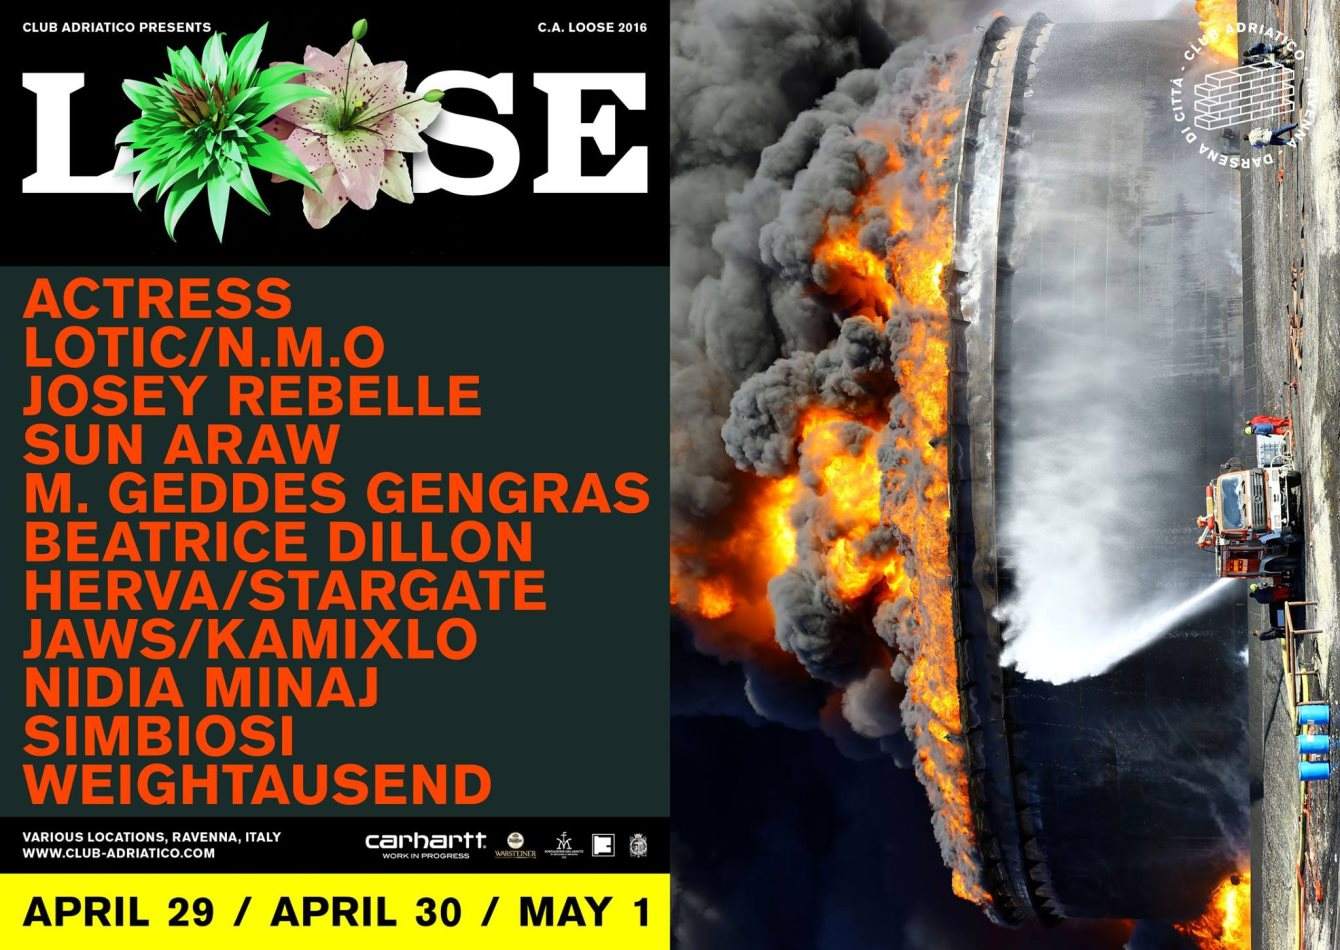 C.A. Loose 2016 - with Actress, Lotic, N.M.O., Josey Rebelle, Herva and More TBA - Página frontal